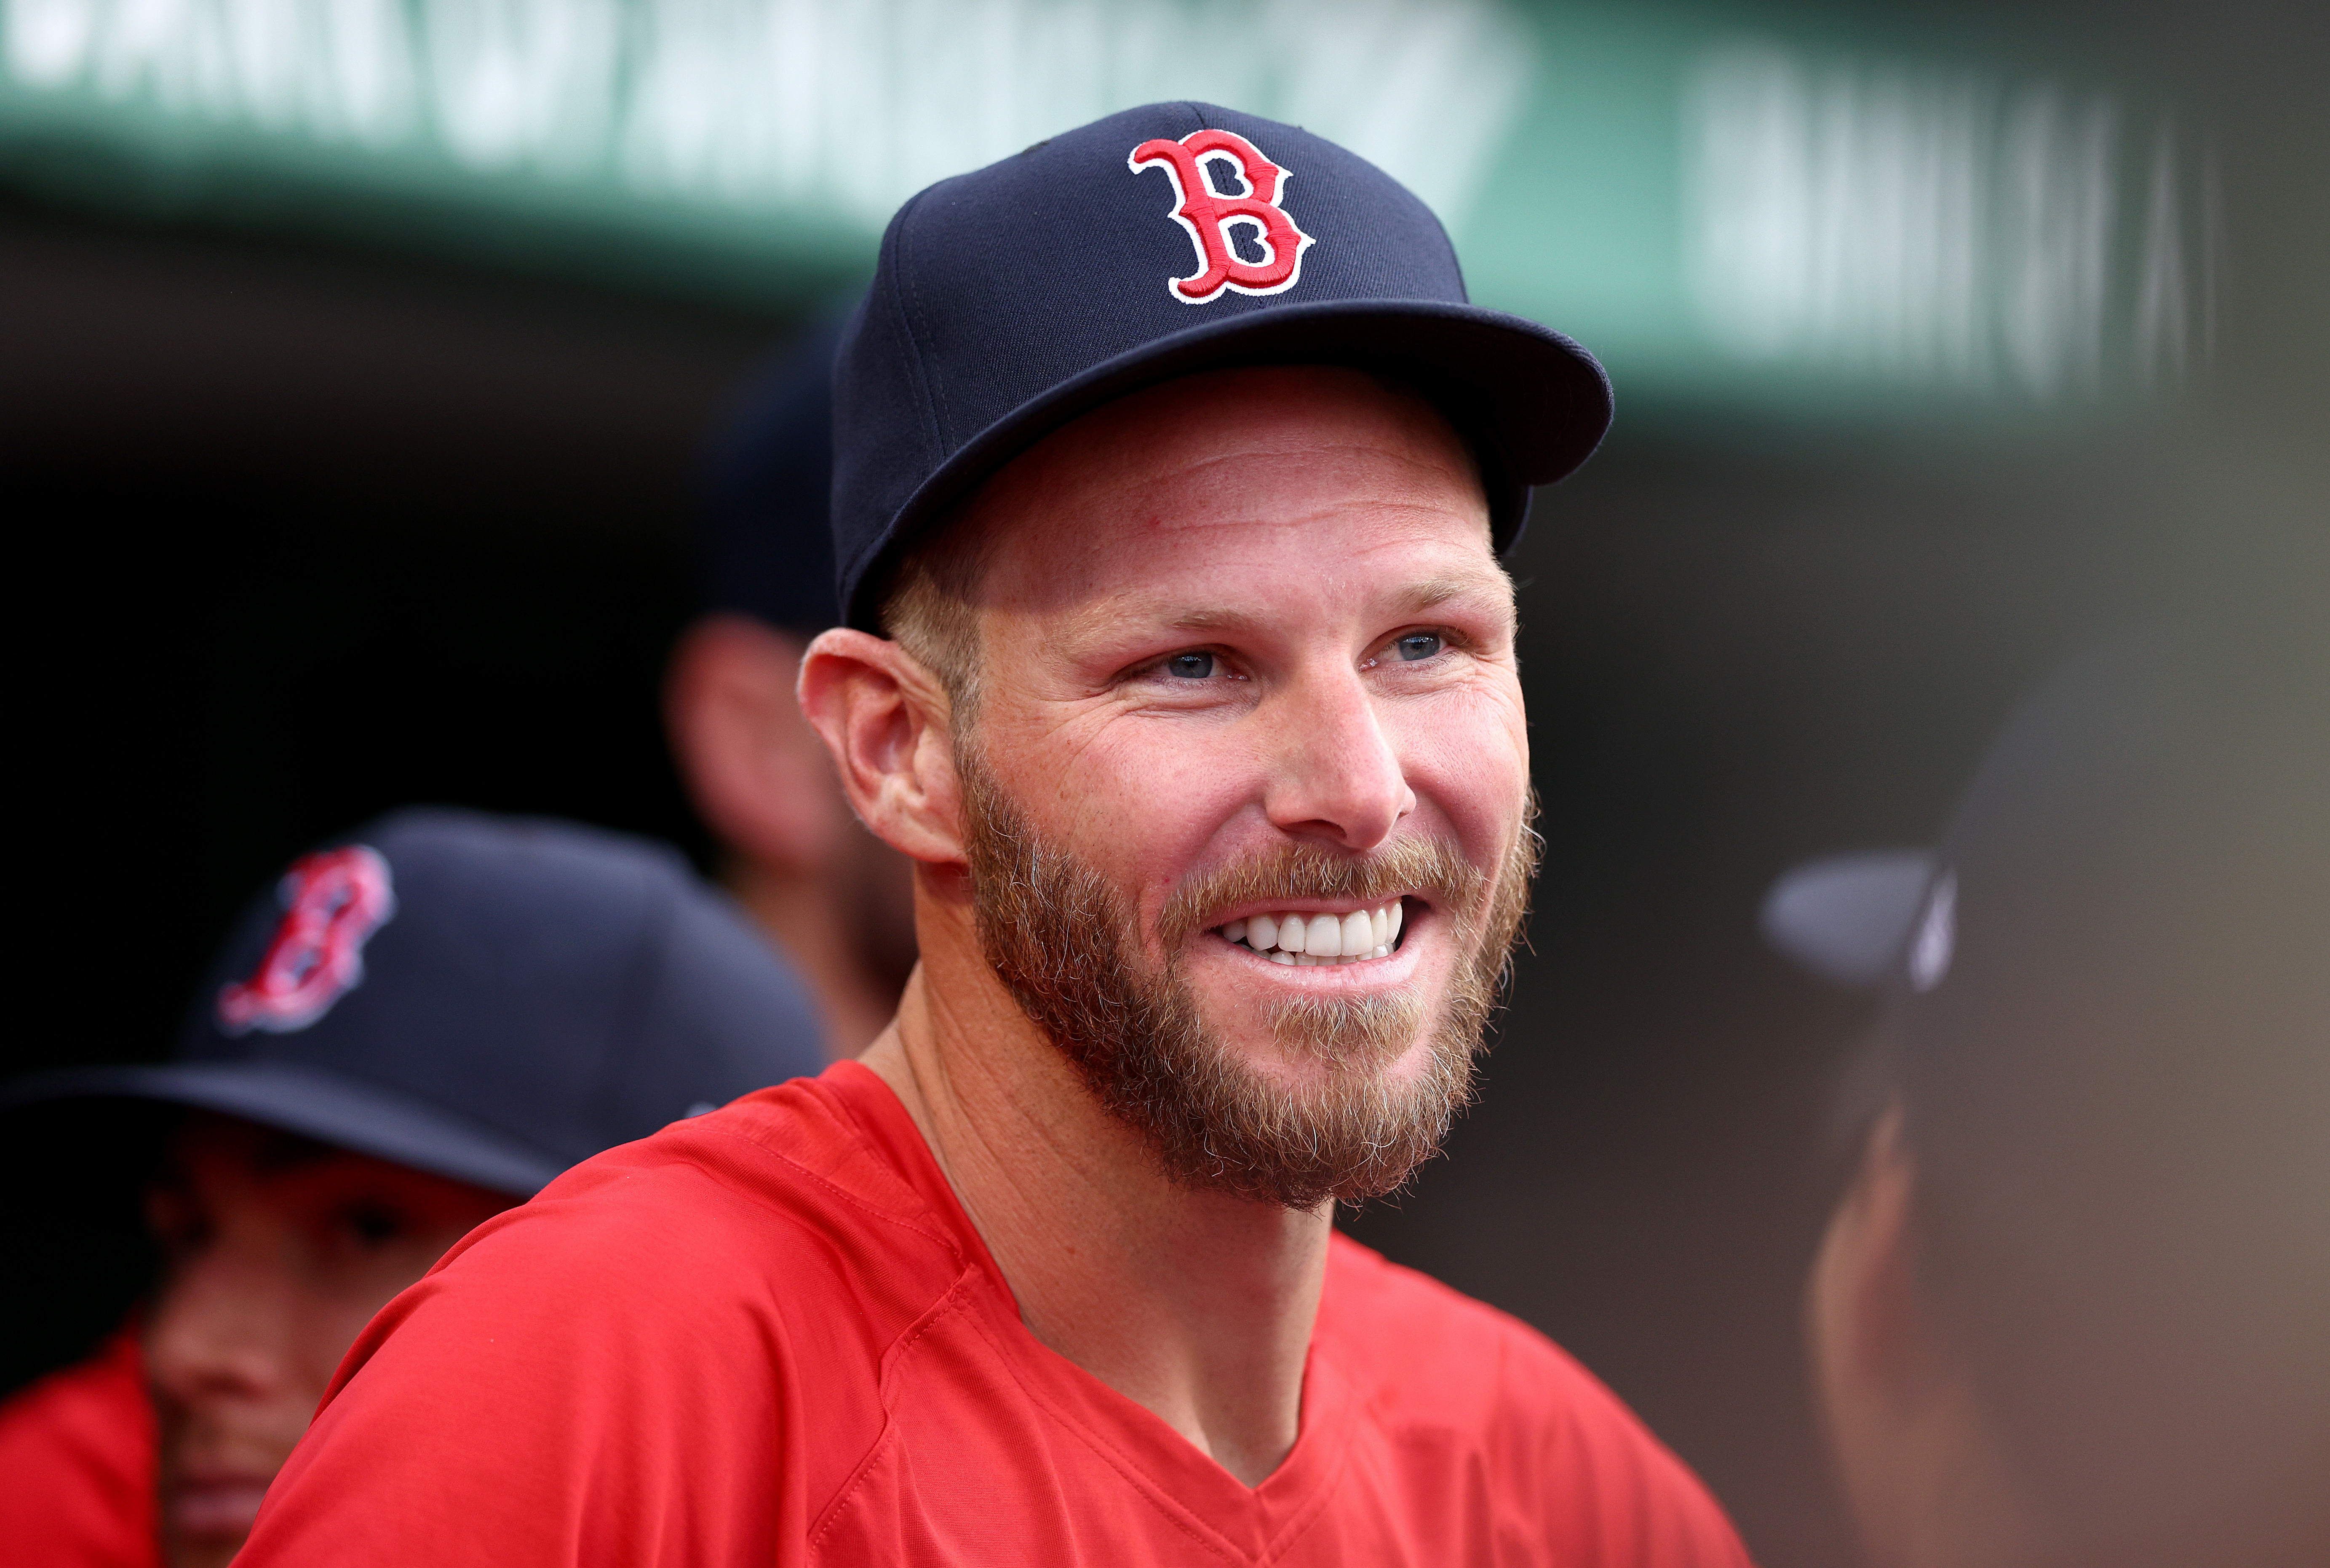 Boston Red Sox: Chris Sale Sounds Super Excited to Join Team